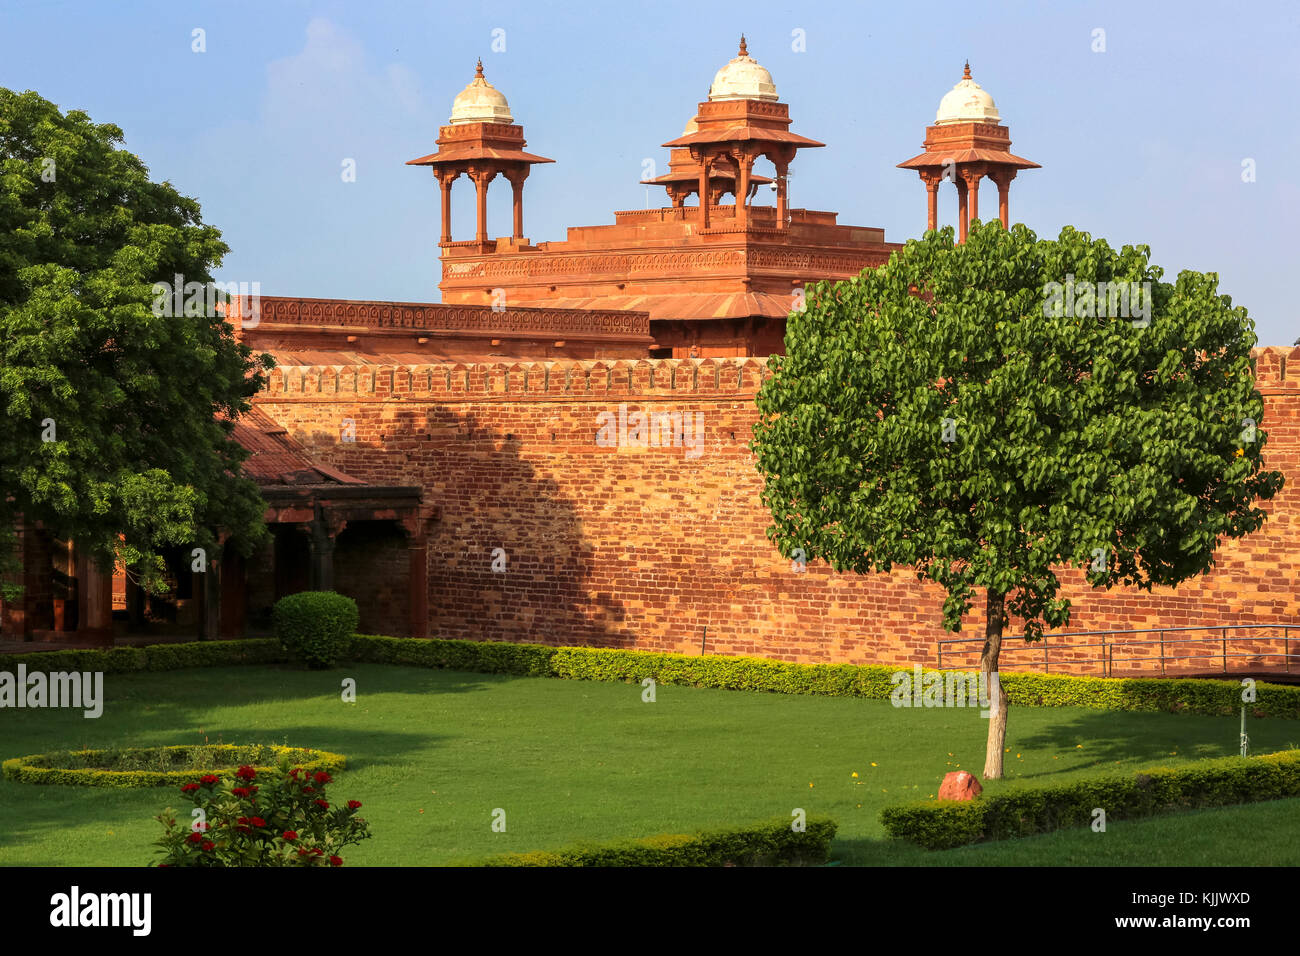 Fatehpur Sikri, founded in 1569 by the Mughal Emperor Akbar, served as the capital of the Mughal Empire from 1571 to 1585.  Imperial Palace complex. Stock Photo